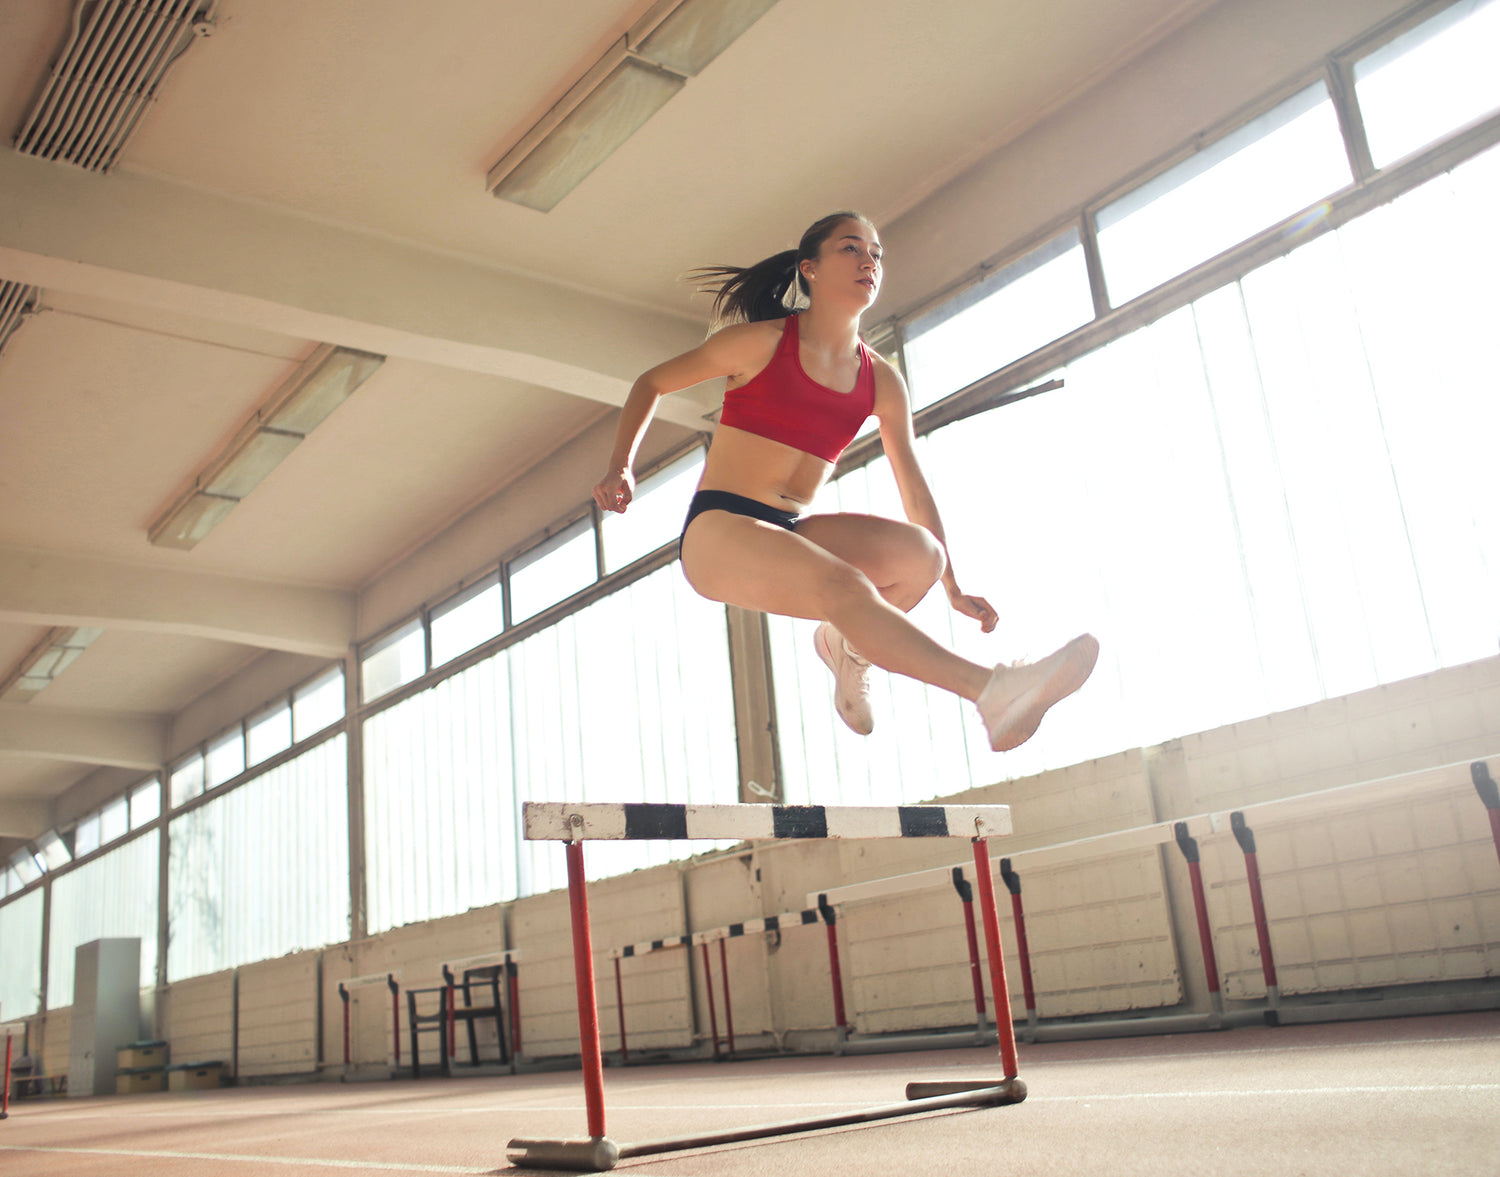 A woman jumping over a hurdle.